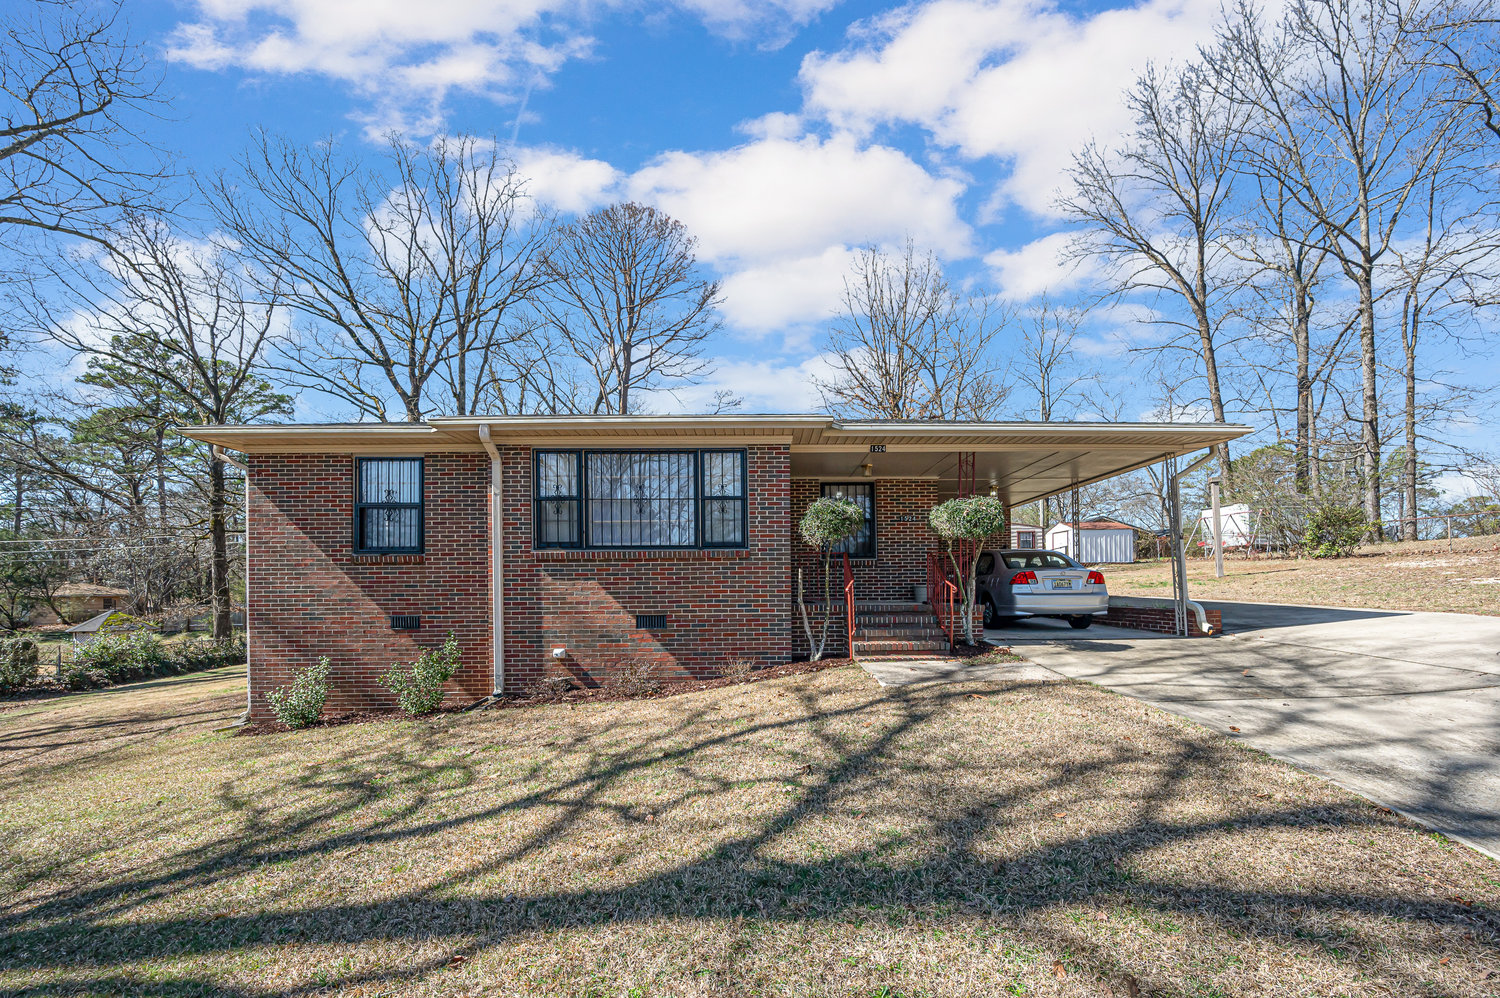 Virtual Tour of Birmingham Metro Real Estate Listing For Sale | 1524 2nd Pl NW, Center Point, AL 35215